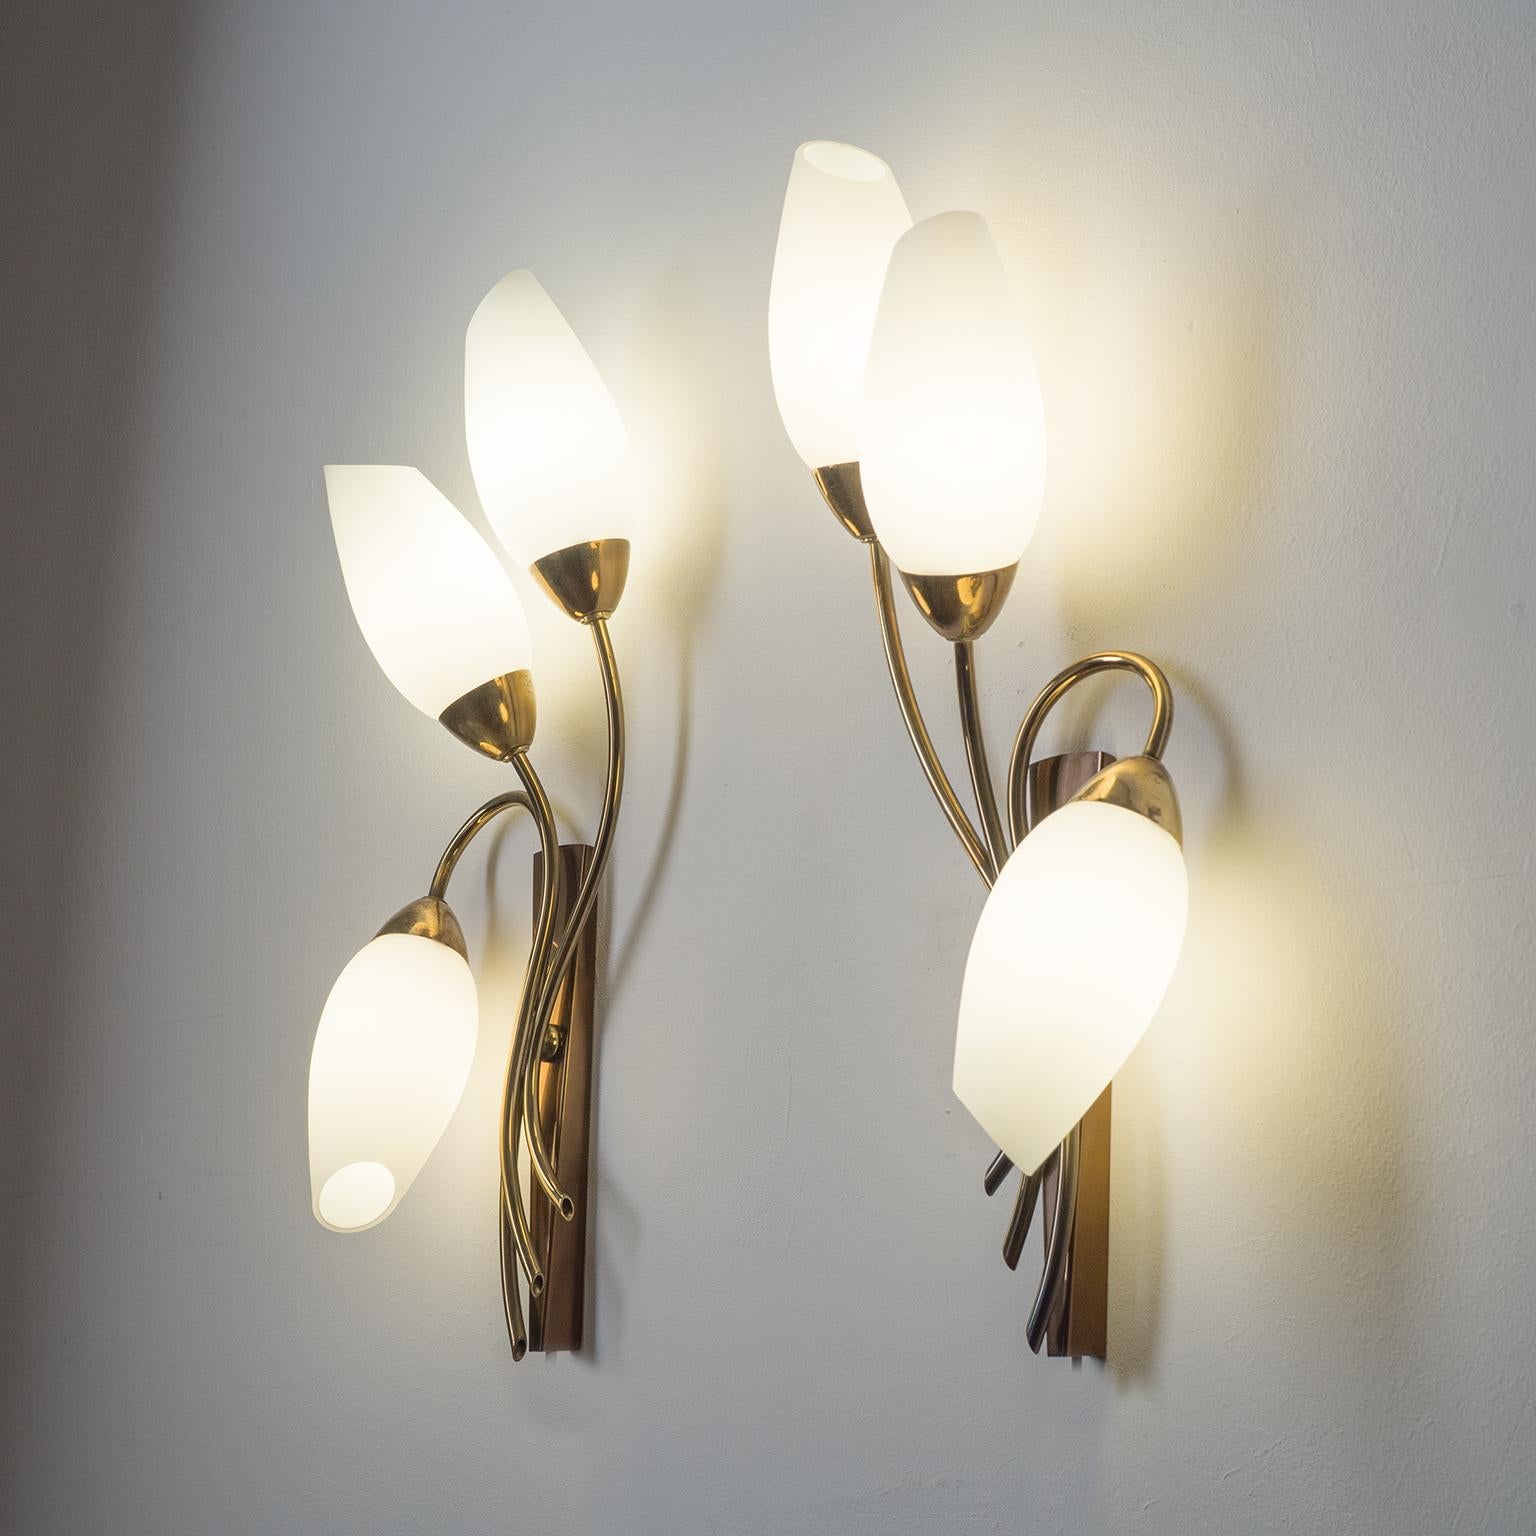 Large French Wall Lights, 1950s, Brass and Satin Glass 6